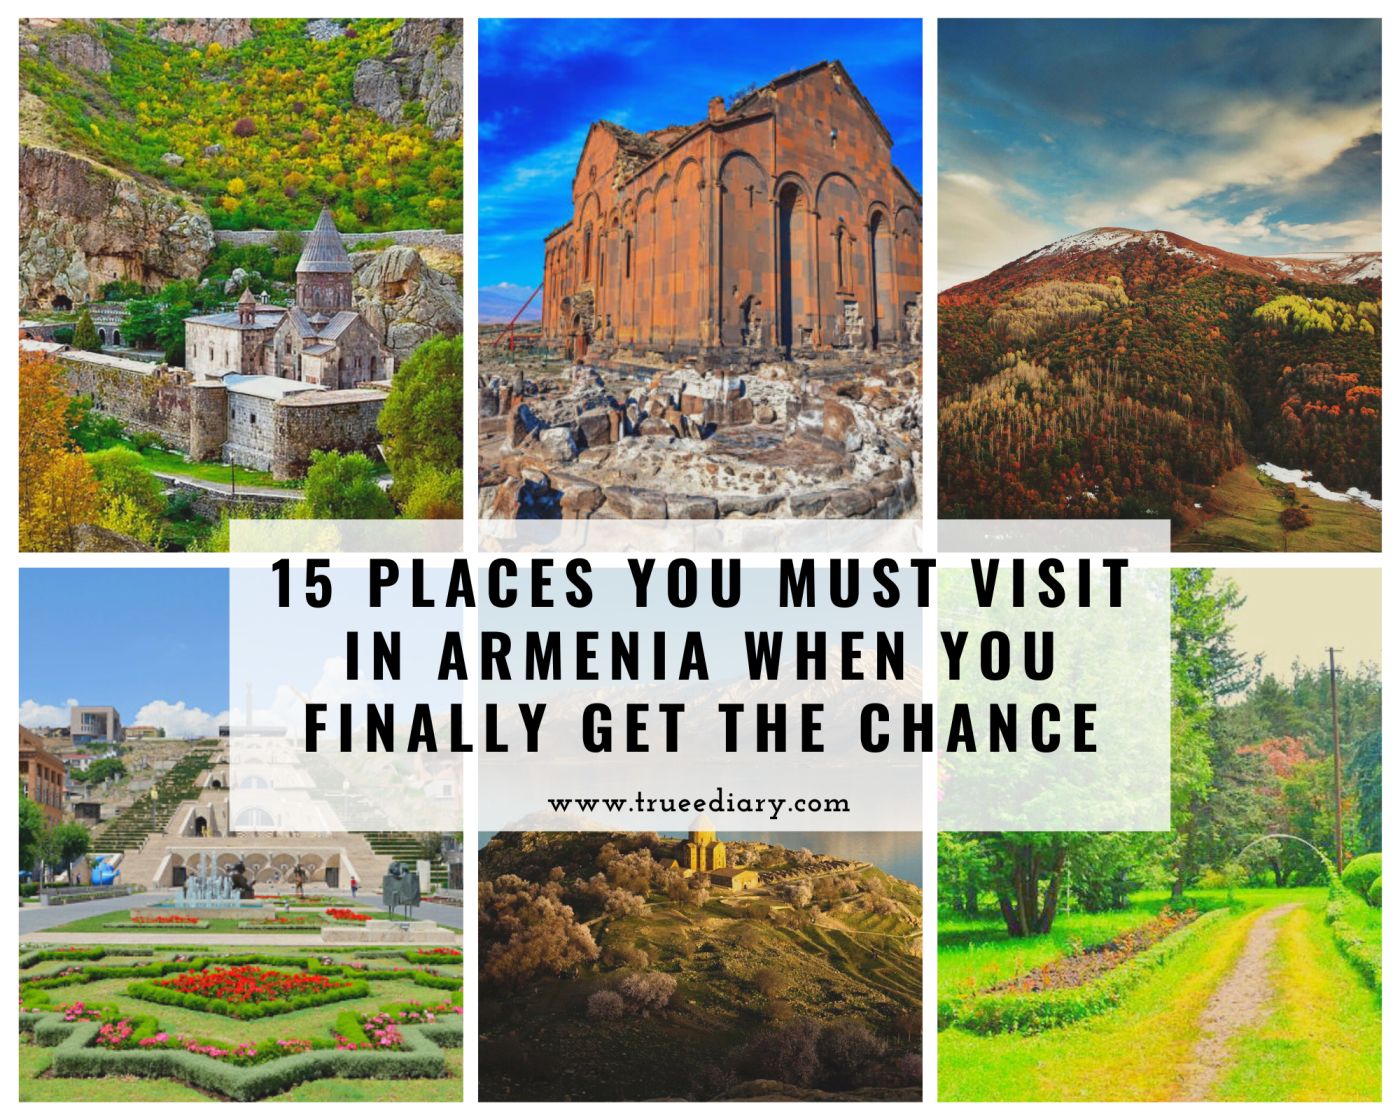 15 Places You Must Visit In Armenia When You Finally Get the Chance